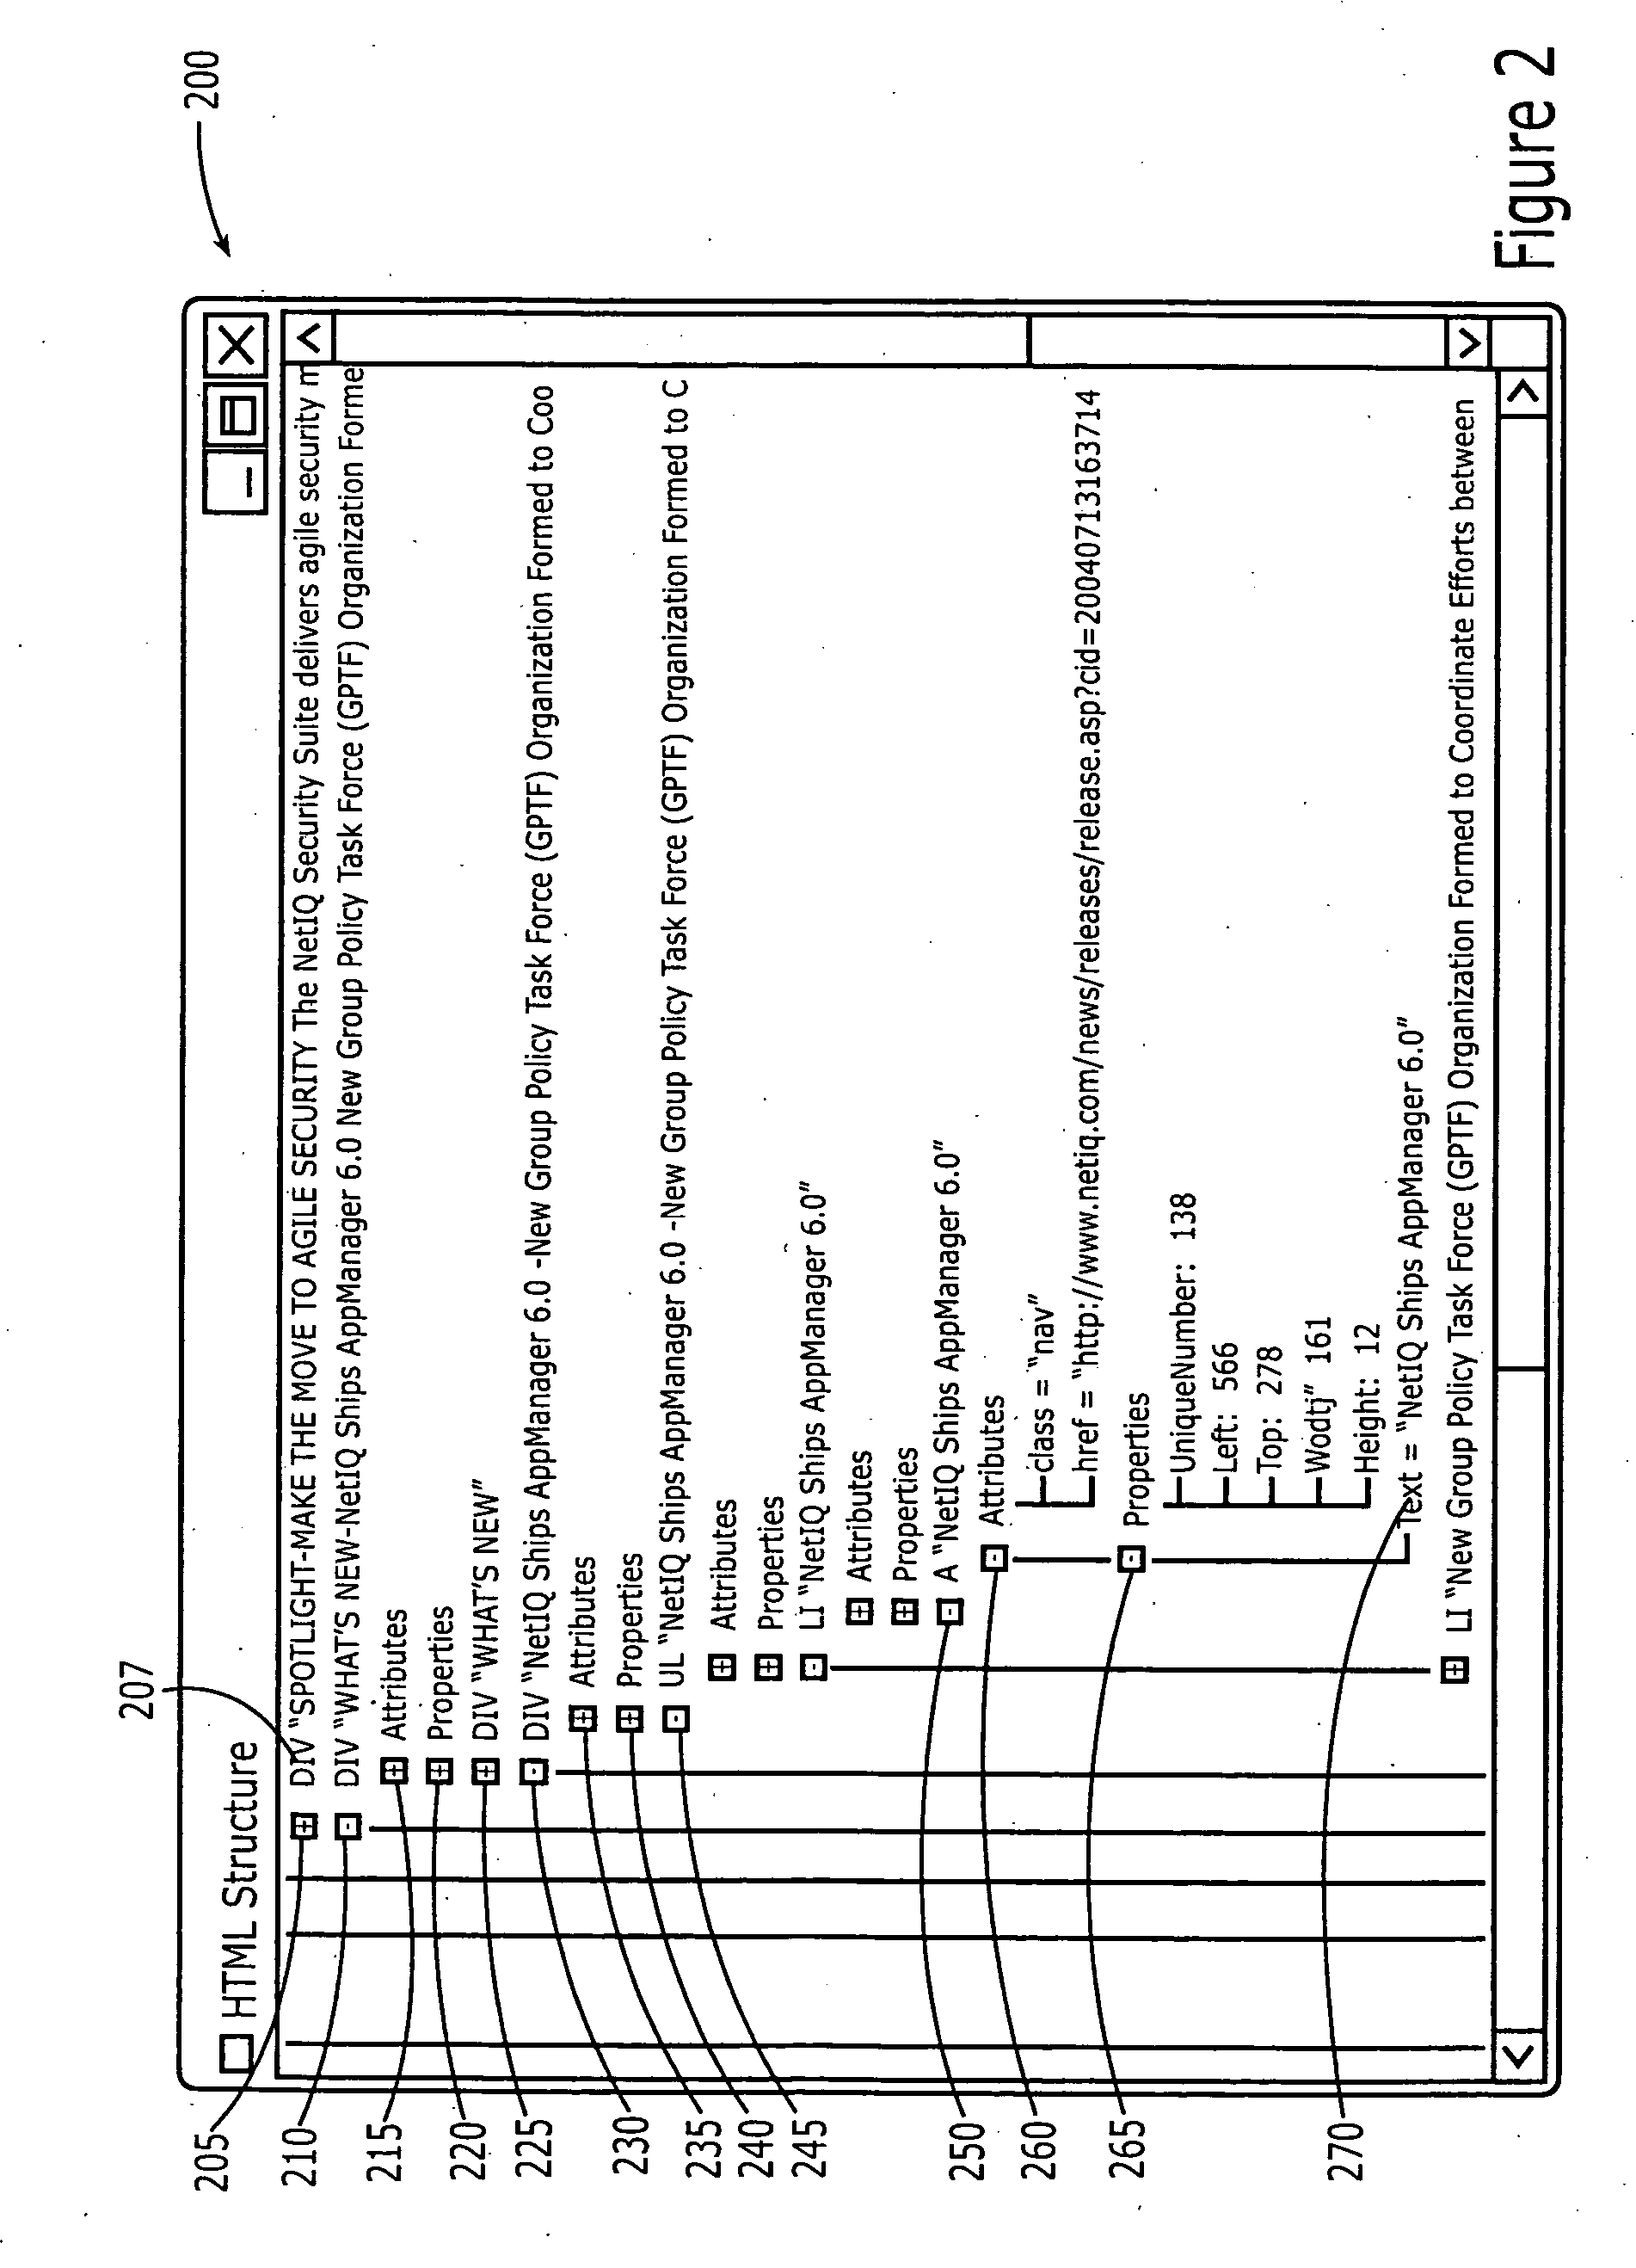 Methods, systems and computer program products for monitoring a browsing session